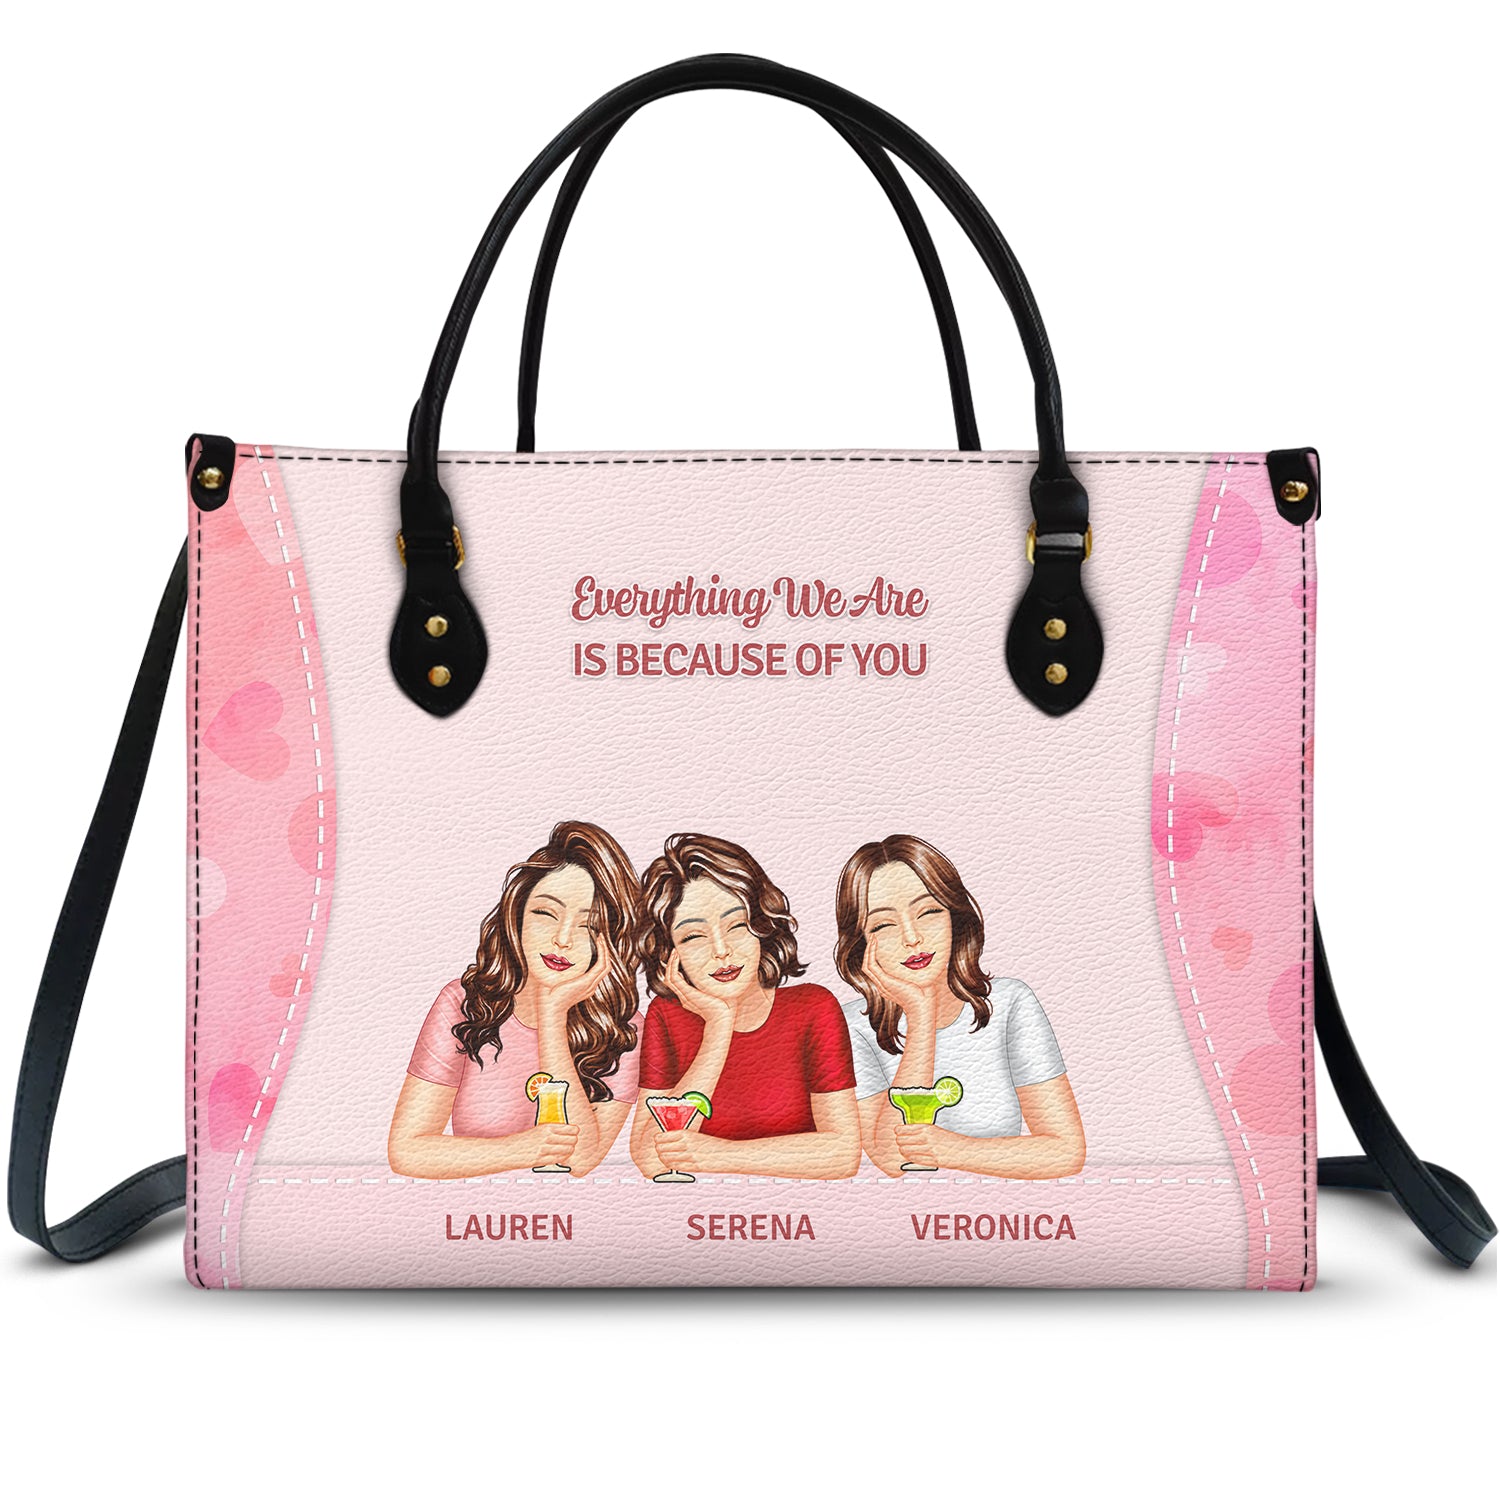 Everything I Am Is Because Of You - Loving Gift For Mom, Mother - Personalized Leather Bag